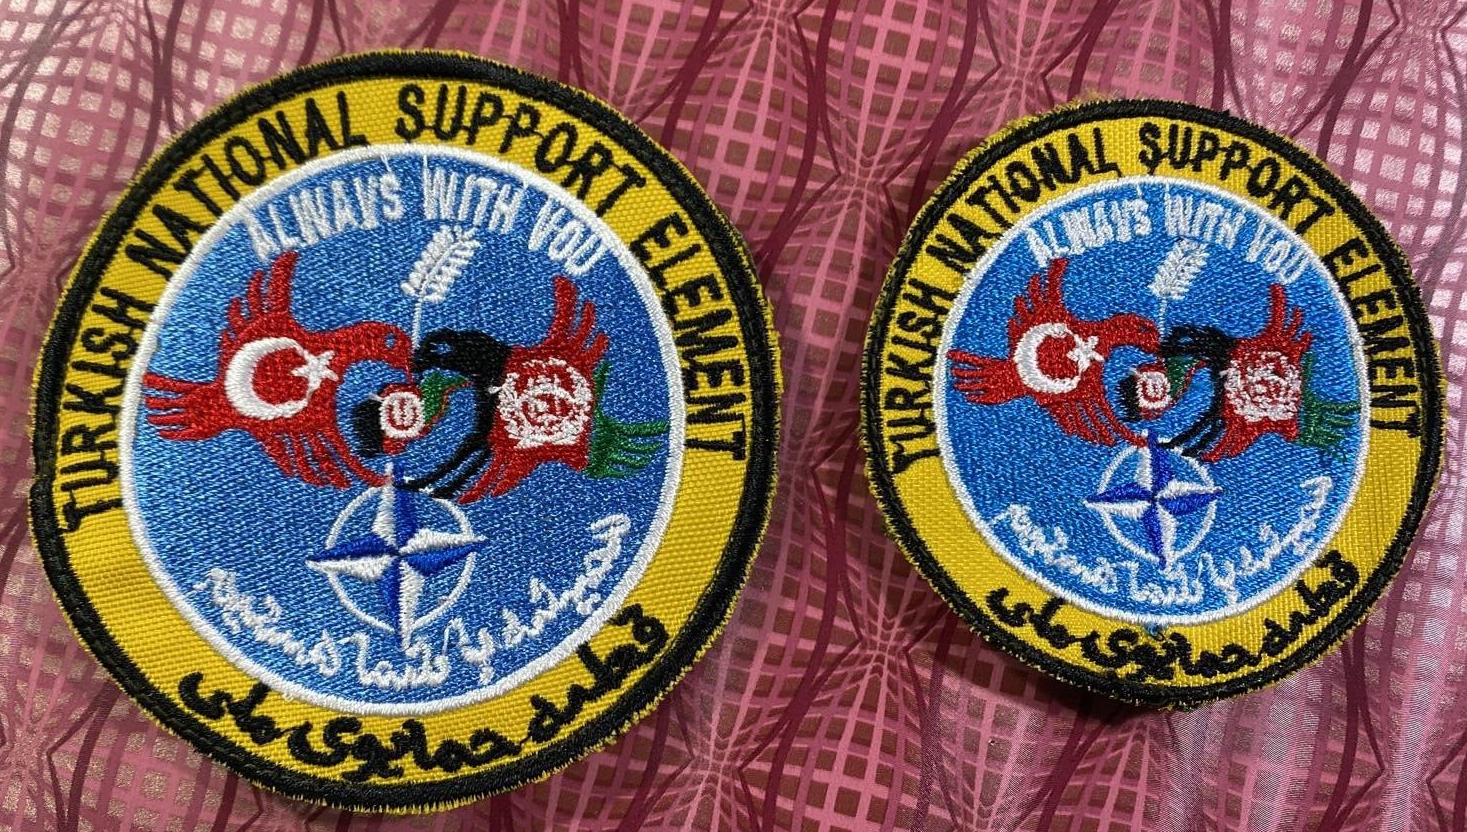 TURKISH NATIONAL SUPPORT ELEMENT . AFGHANISTAN TURKISH Army Old ex PATCHES BADGE